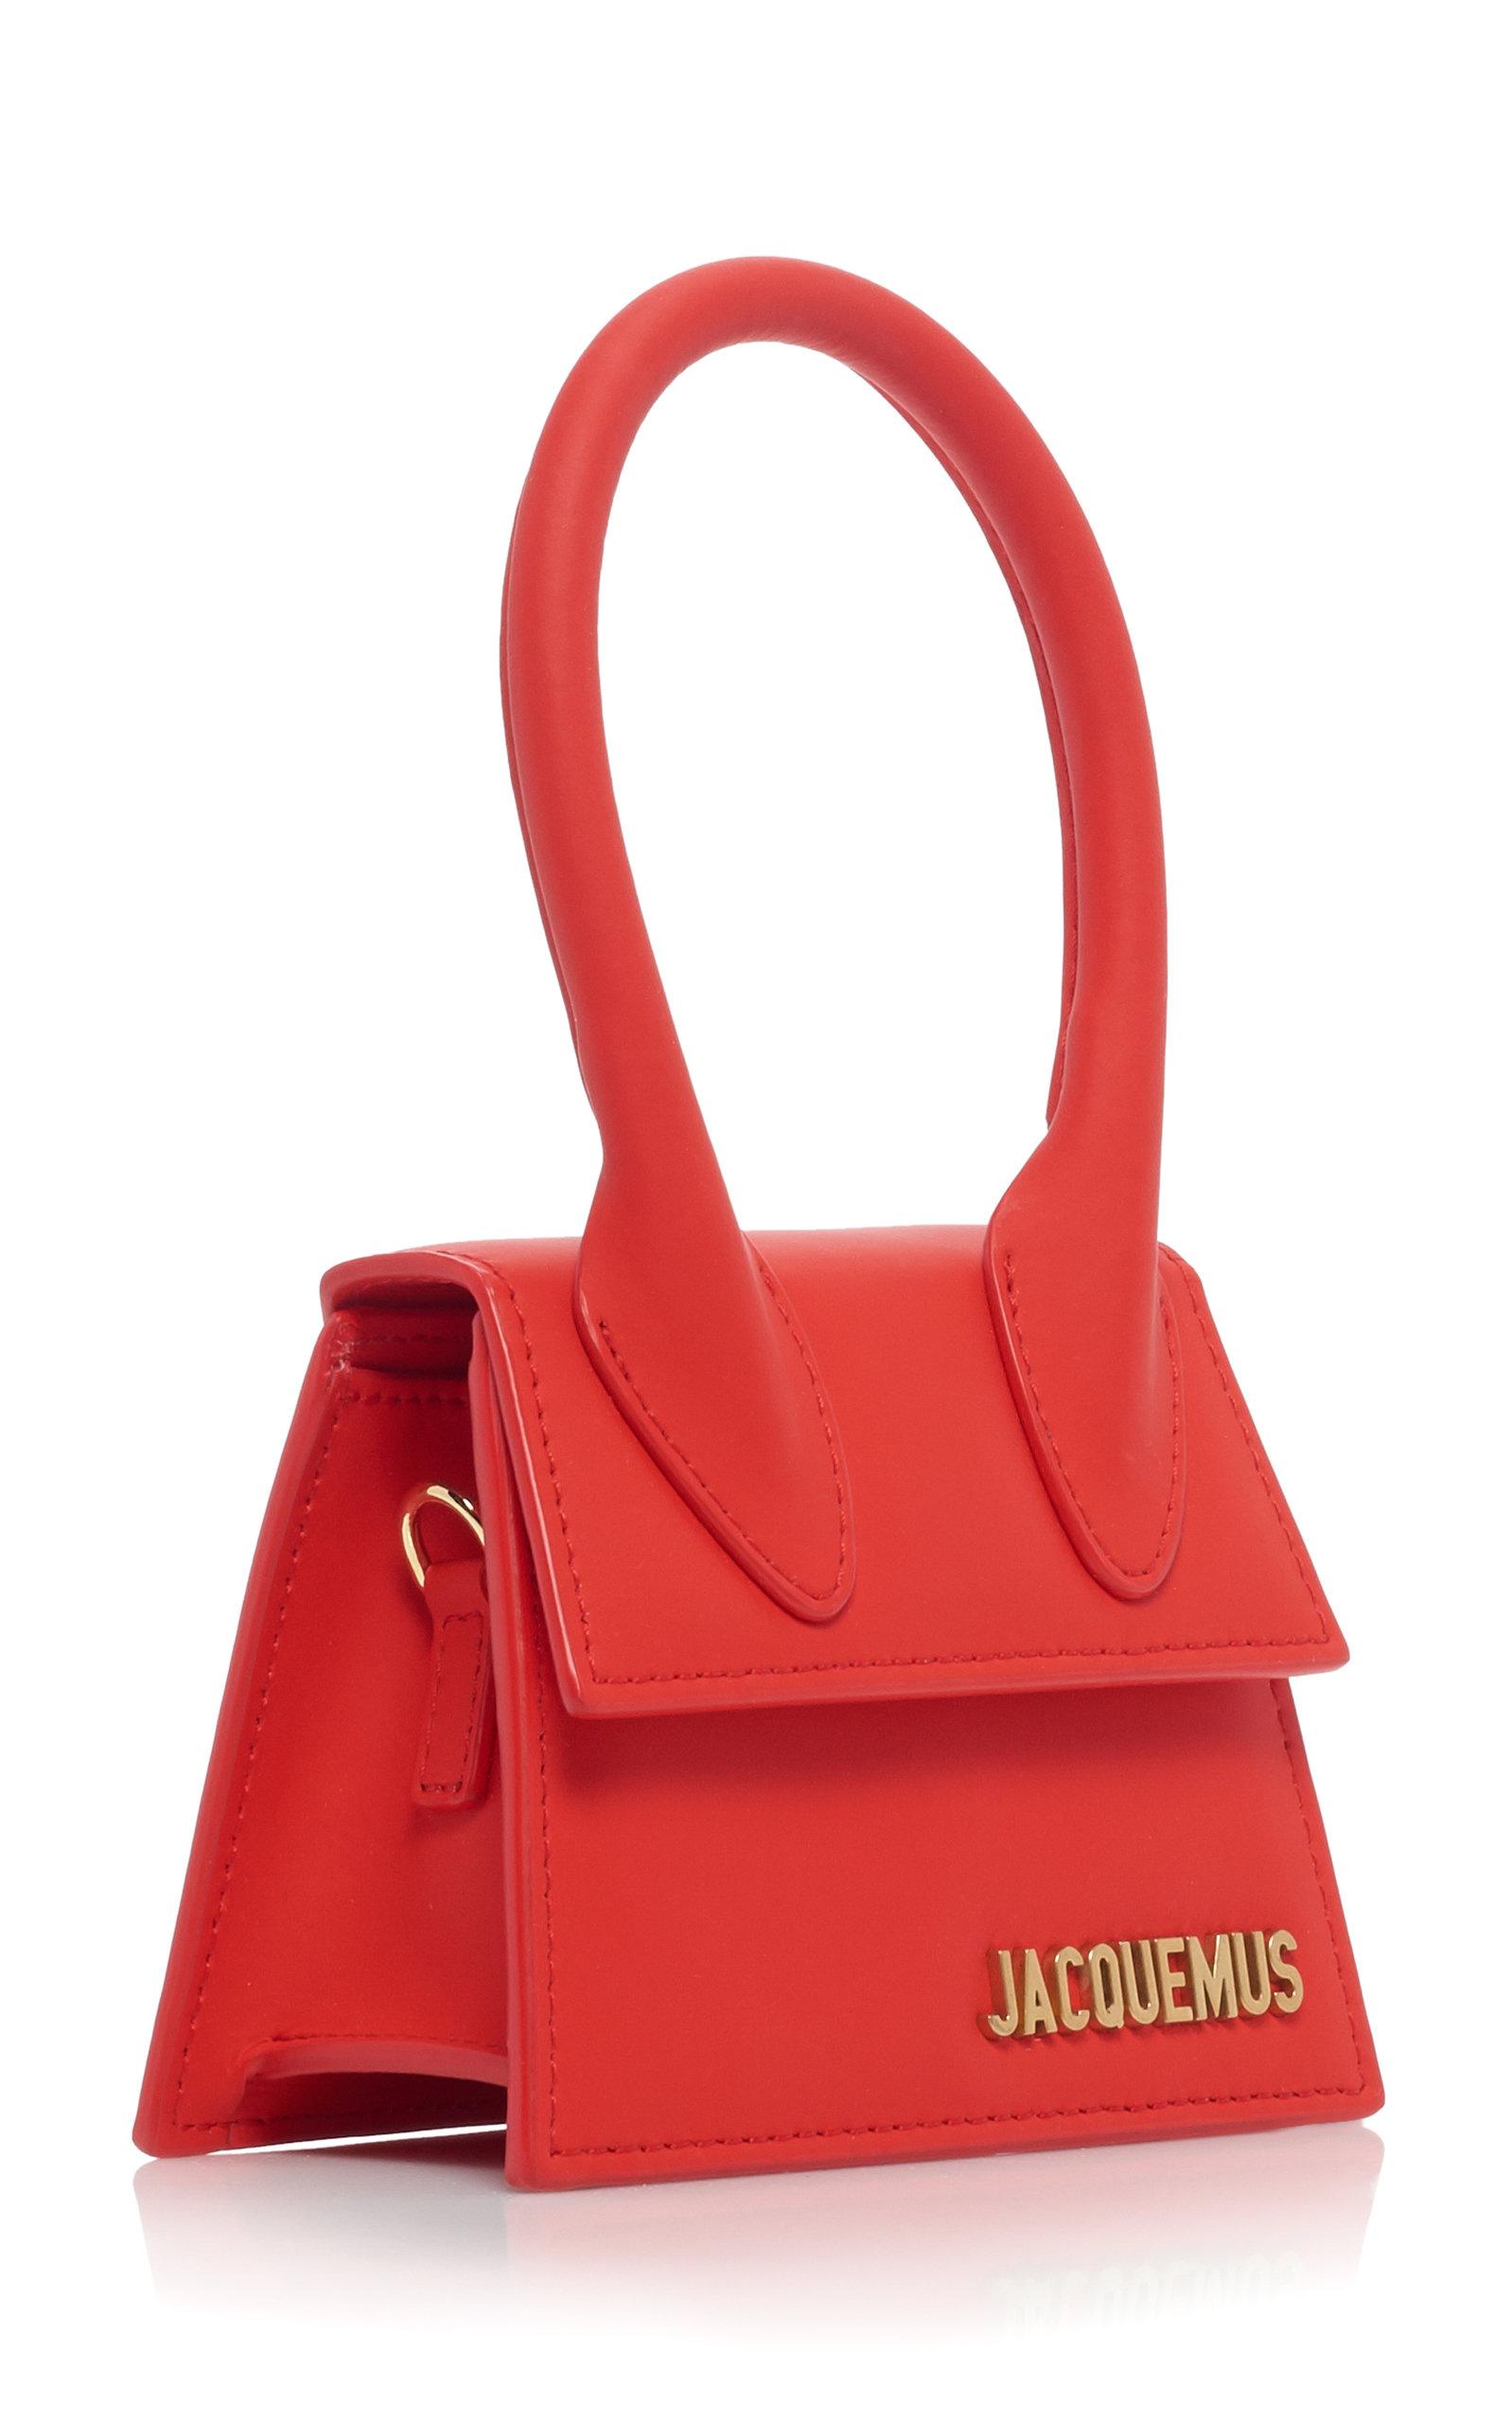 Jacquemus Le Chiquito Mini Leather Tote in Red - Lyst